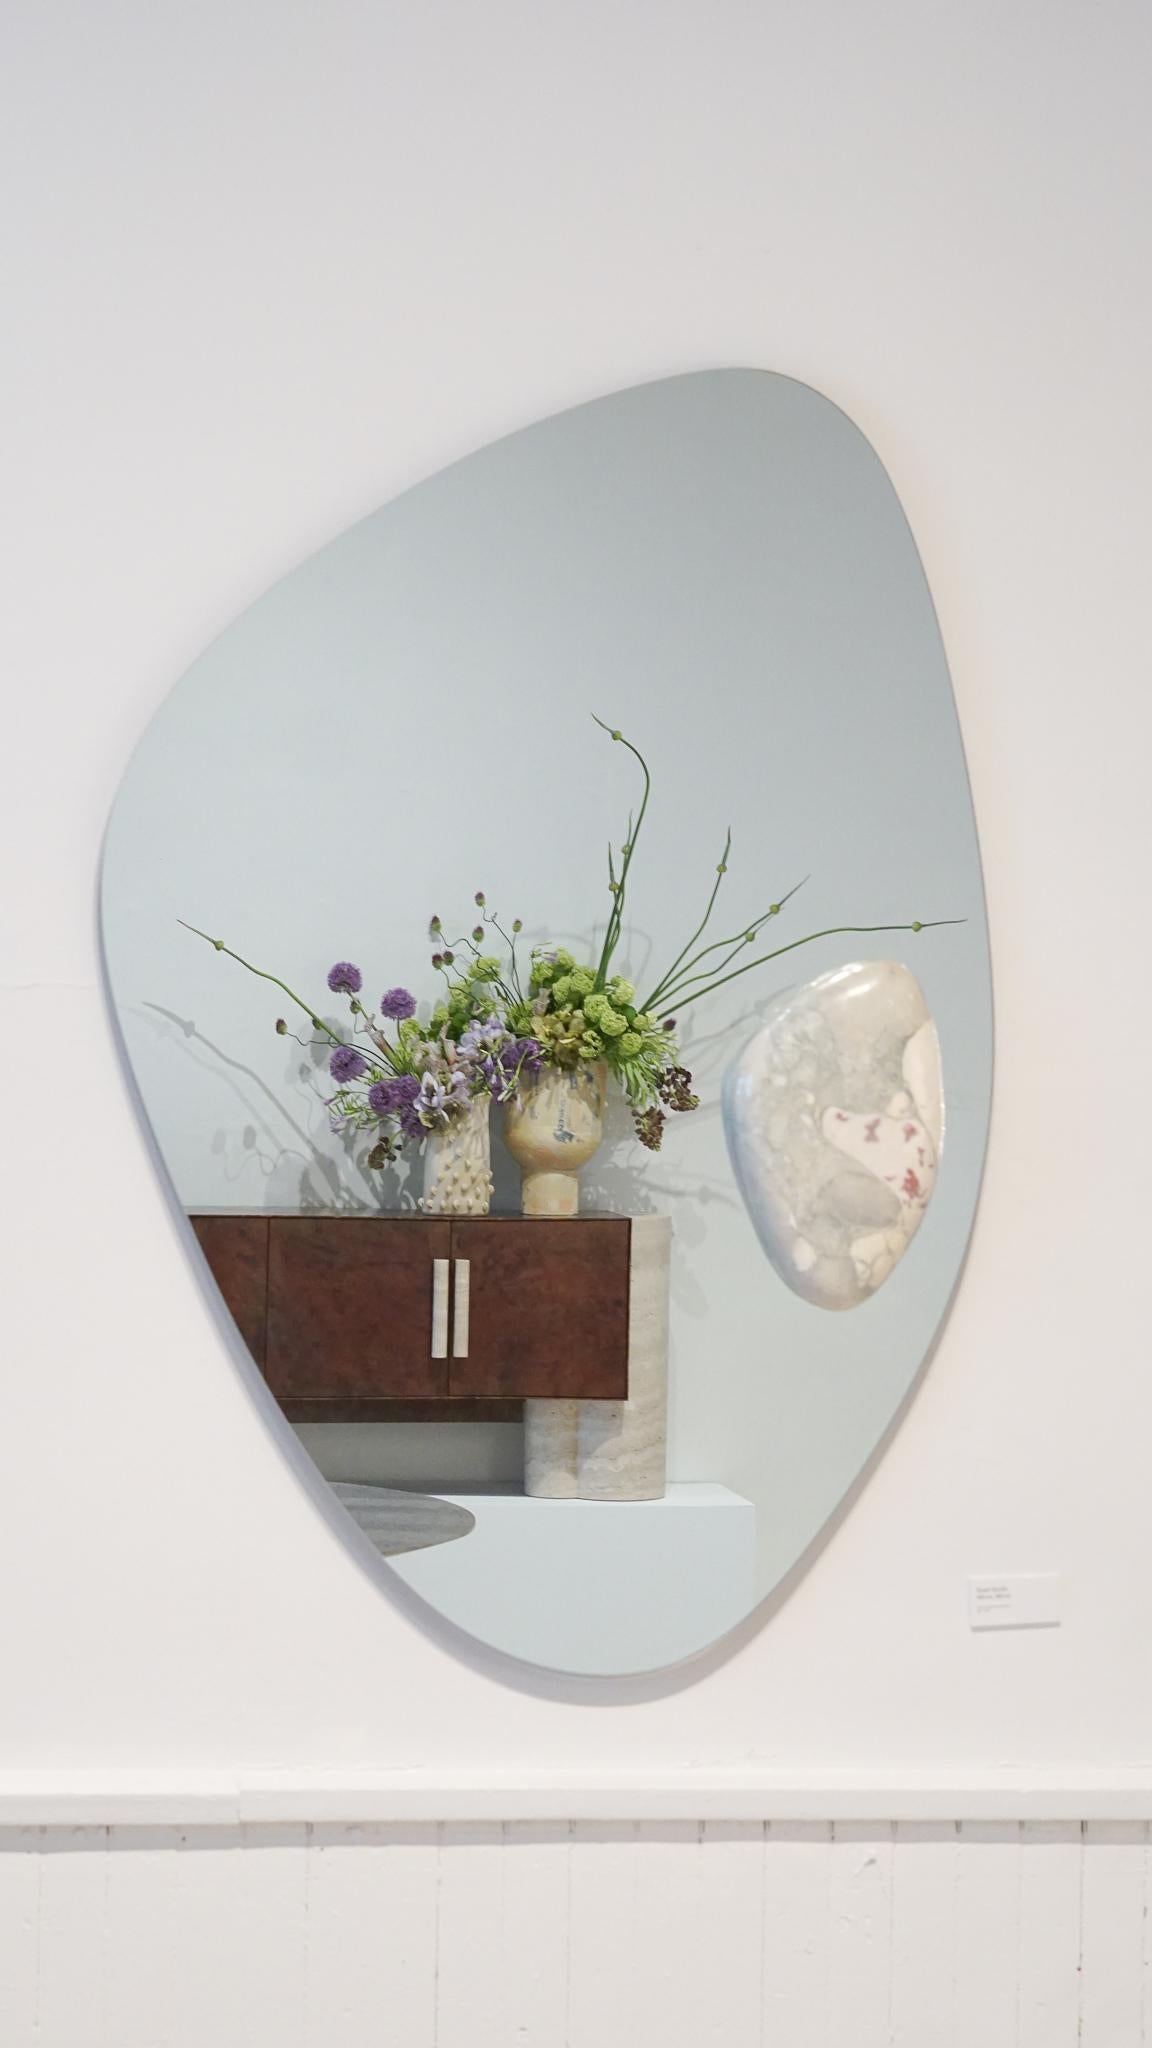 Bryce mirror by Swell Studio.
Dimensions: D3 x W40 x H60 cm.
Material: clear mirror, Breccia Stazzema.


The Bryce mirror is an exploration of organic forms and how two materials can interact. A hand sculpted stone mount effortlessly floating